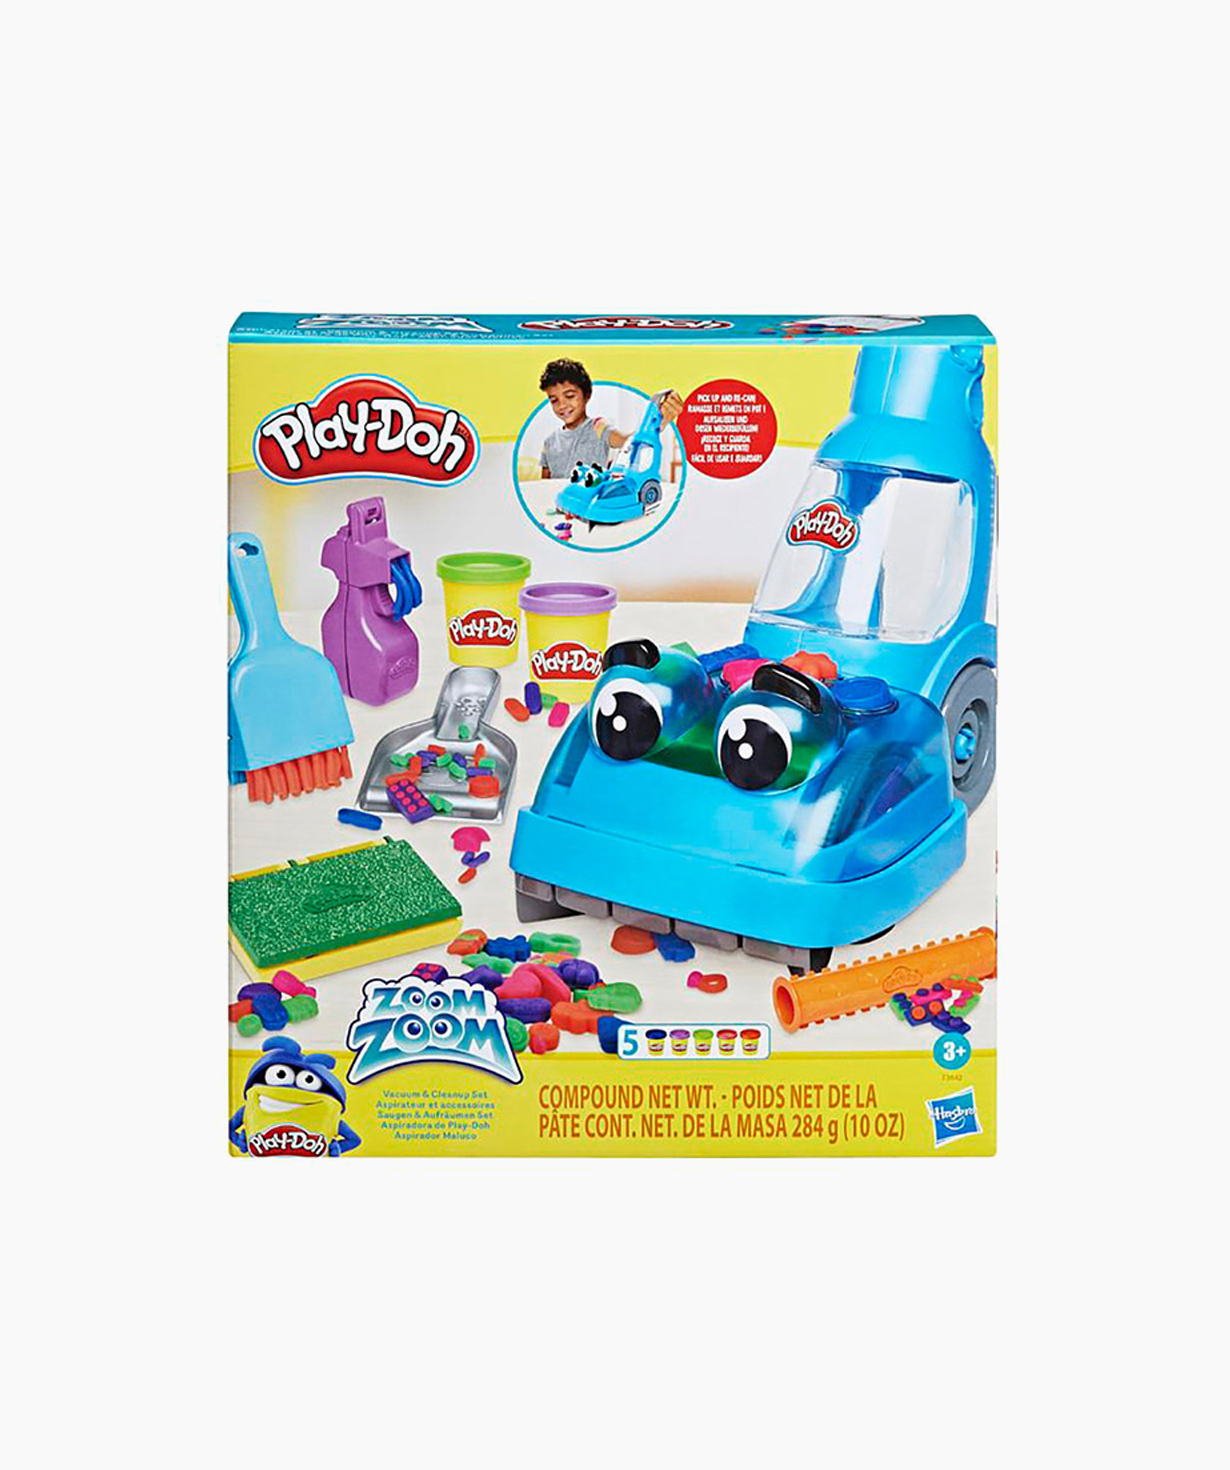 Plasticine Play-Doh Hasbro ZOOM ZOOM Vacuum and Cleanup Set